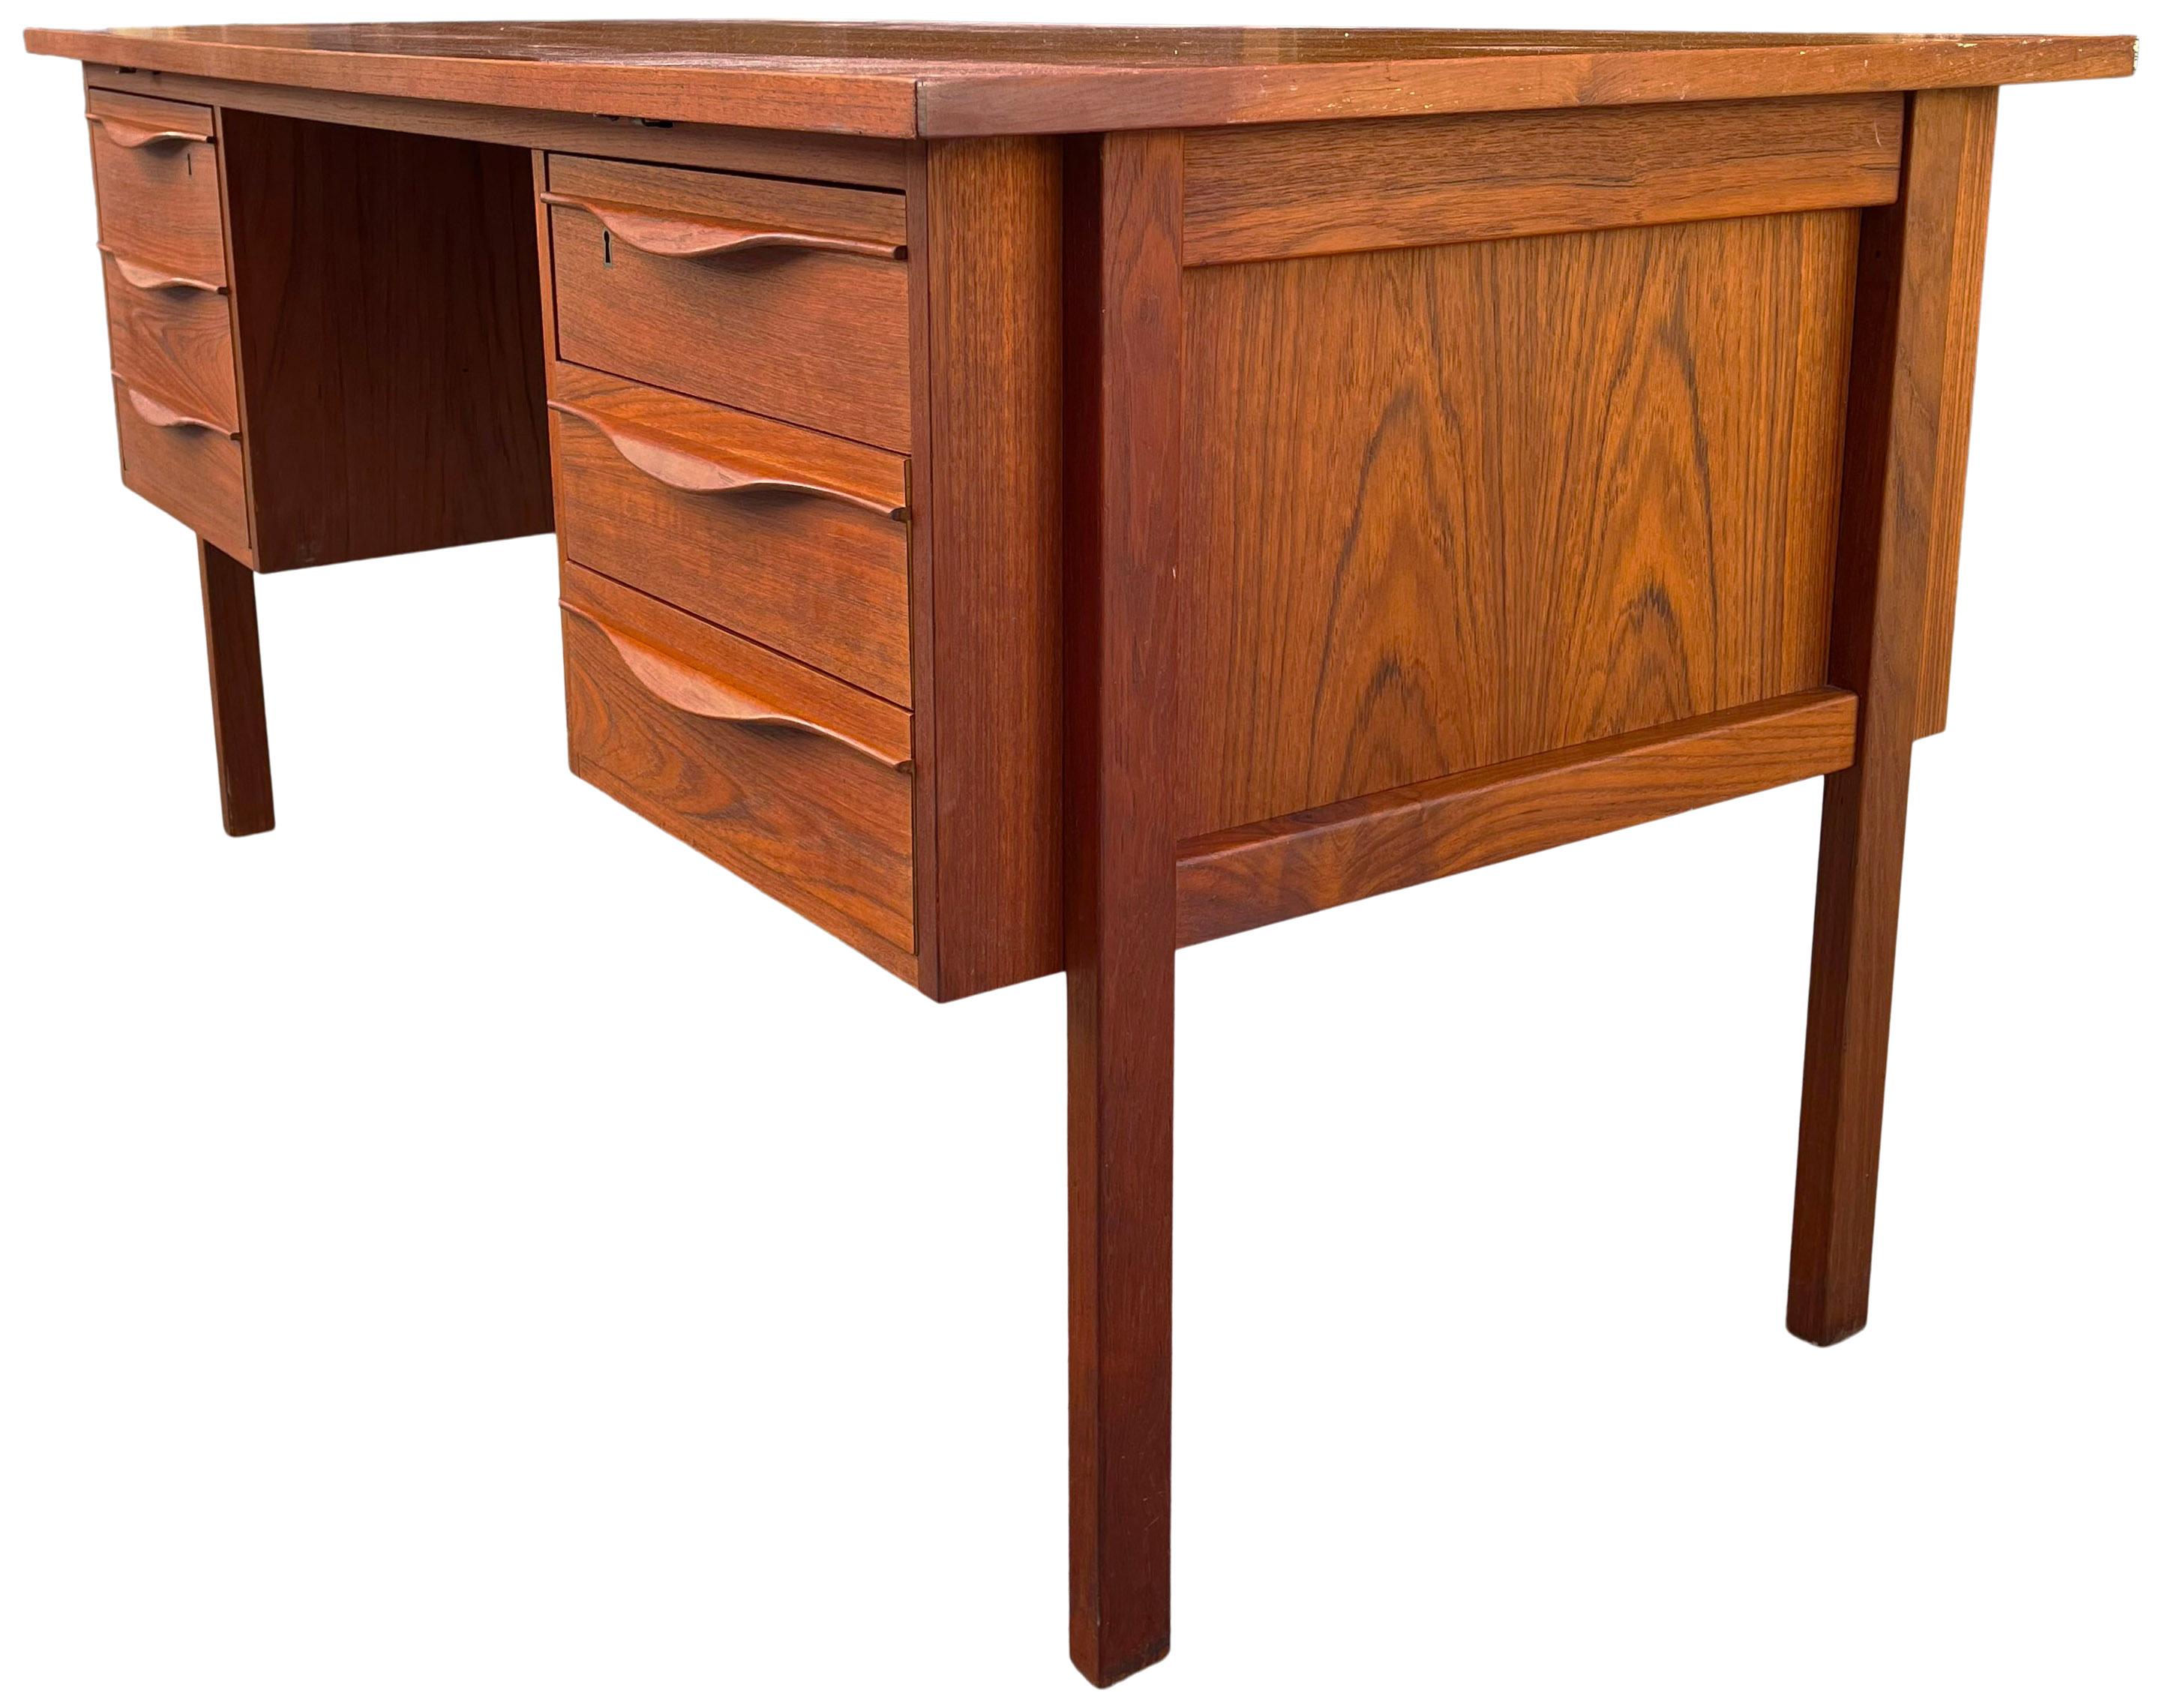 Beautiful teak desk with quality construction. Featuring a sliding top the reveals hidden compartment to store files and even liquor bottles. Graceful curved pulls. In original condition showing very little use for its age. Teak has been oiled and